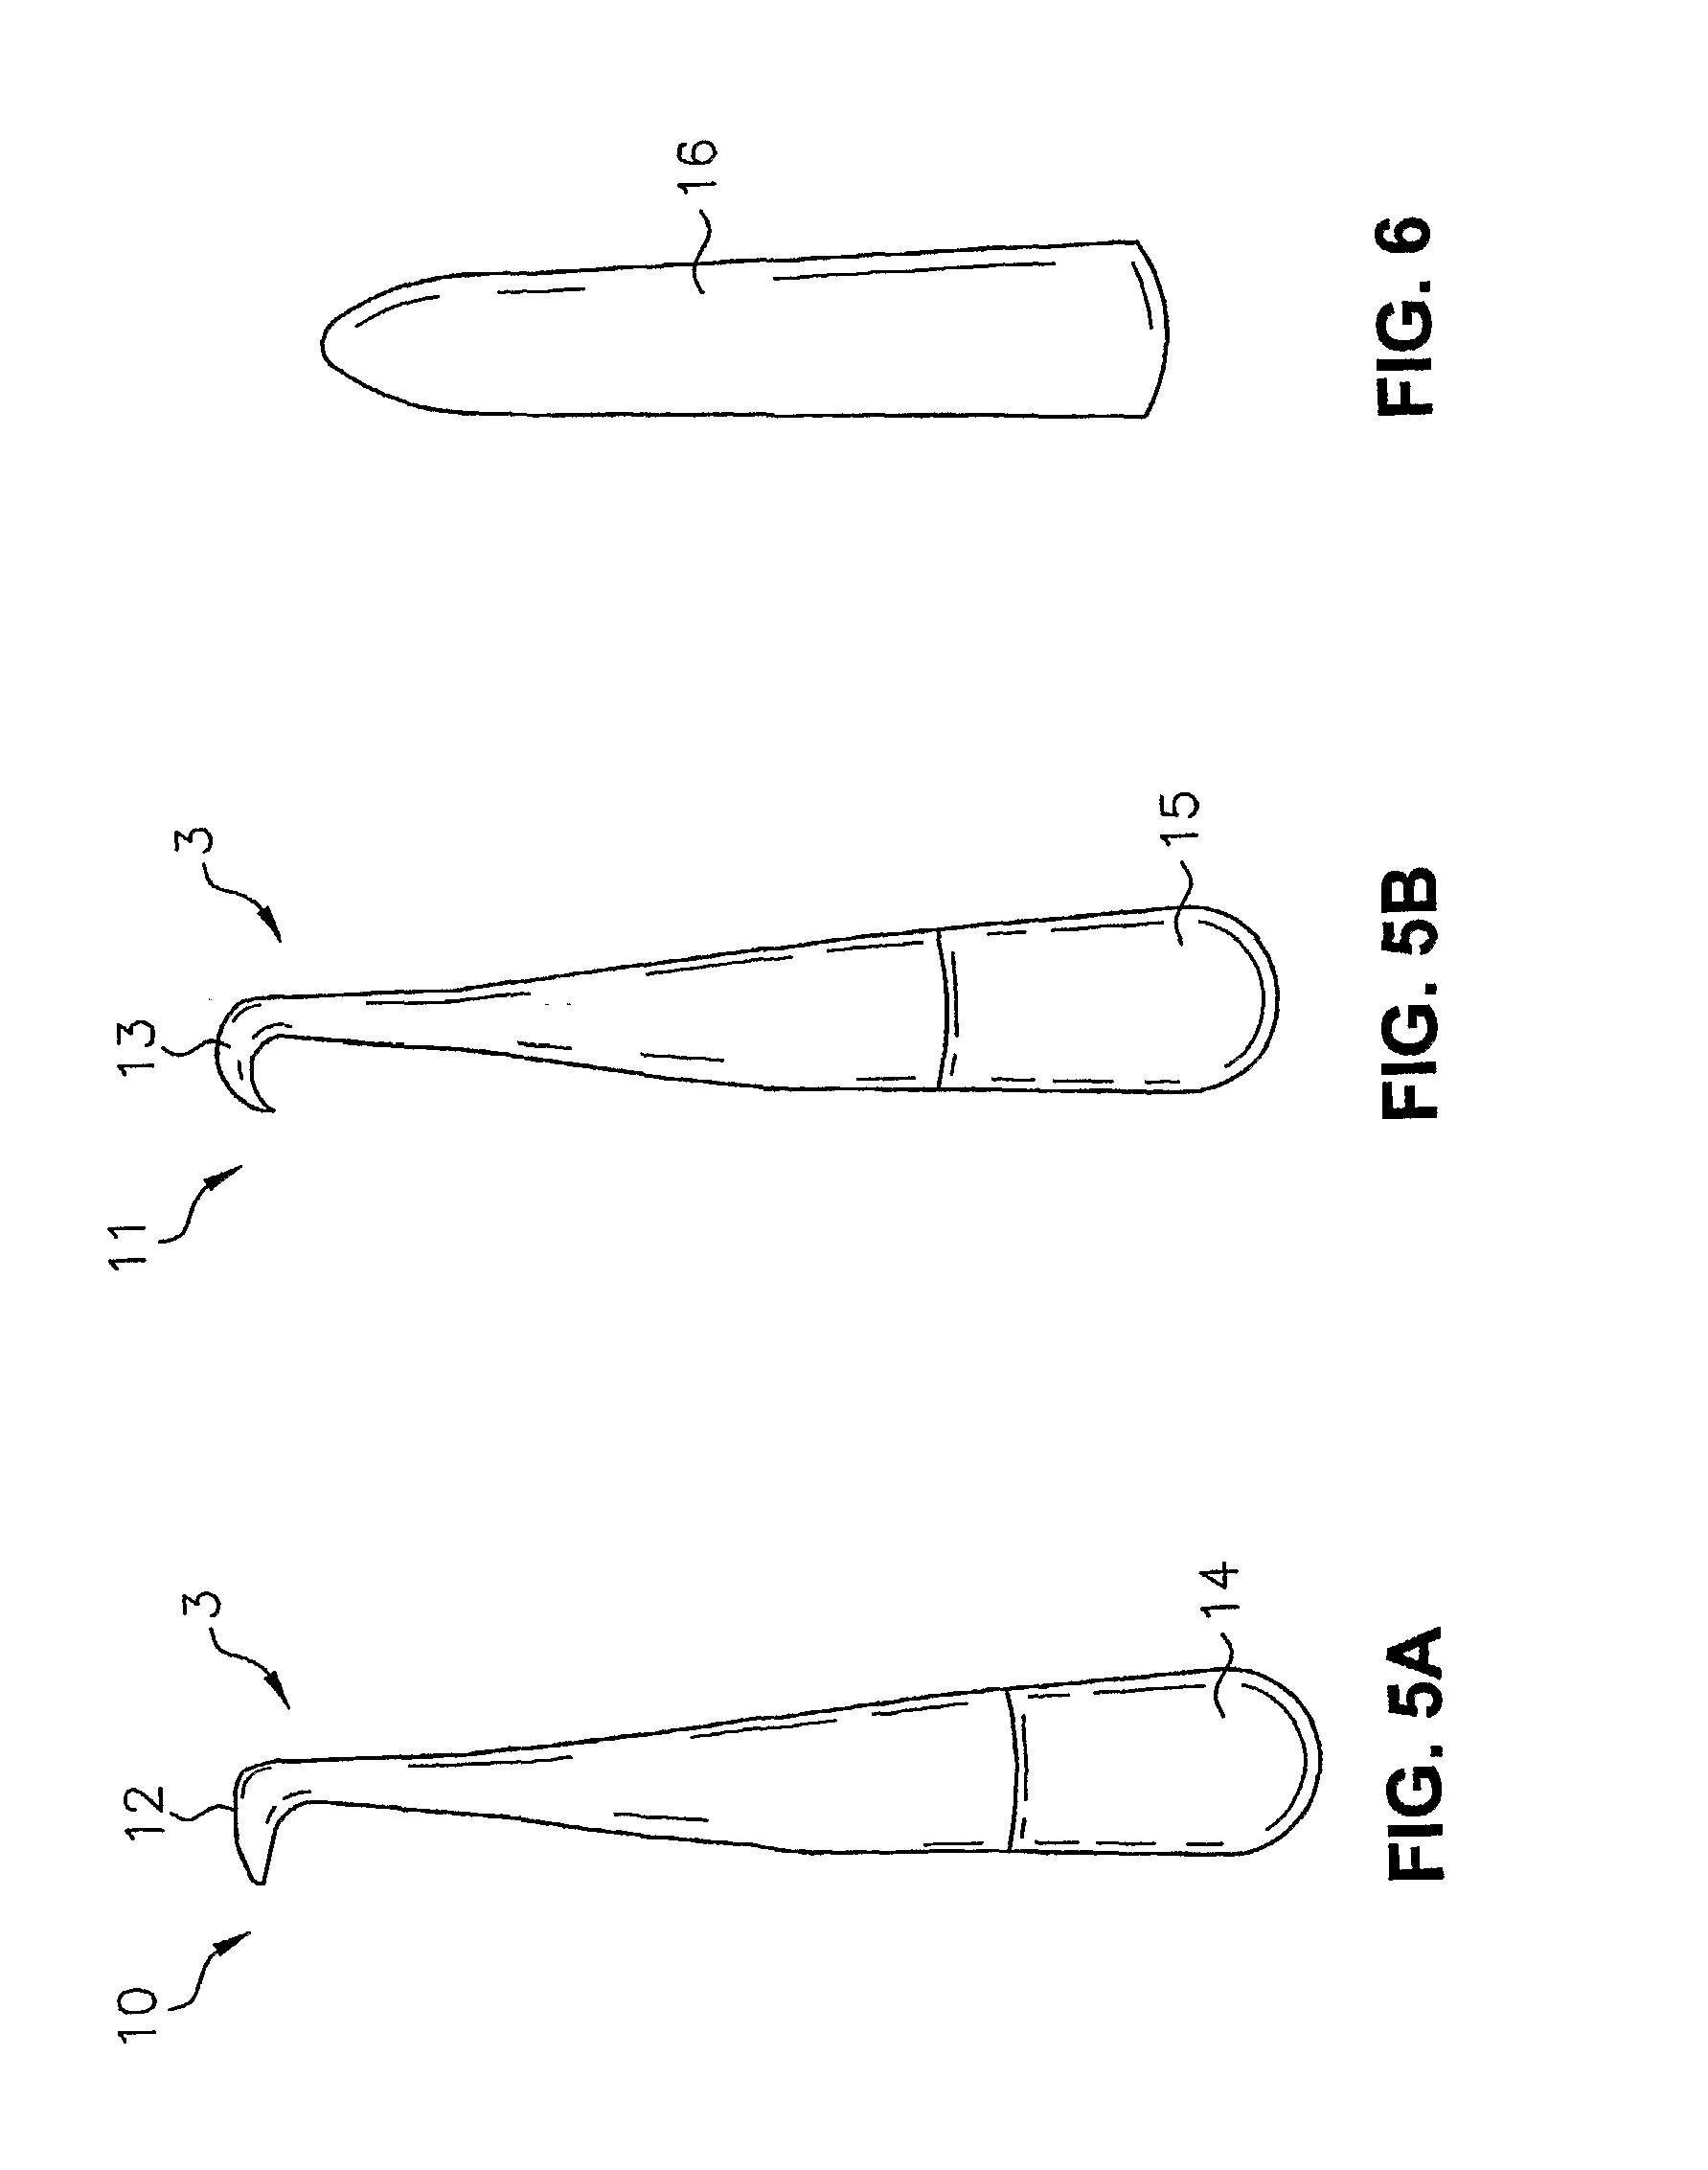 Apparatus for cleaning orthodontic and dental appliances